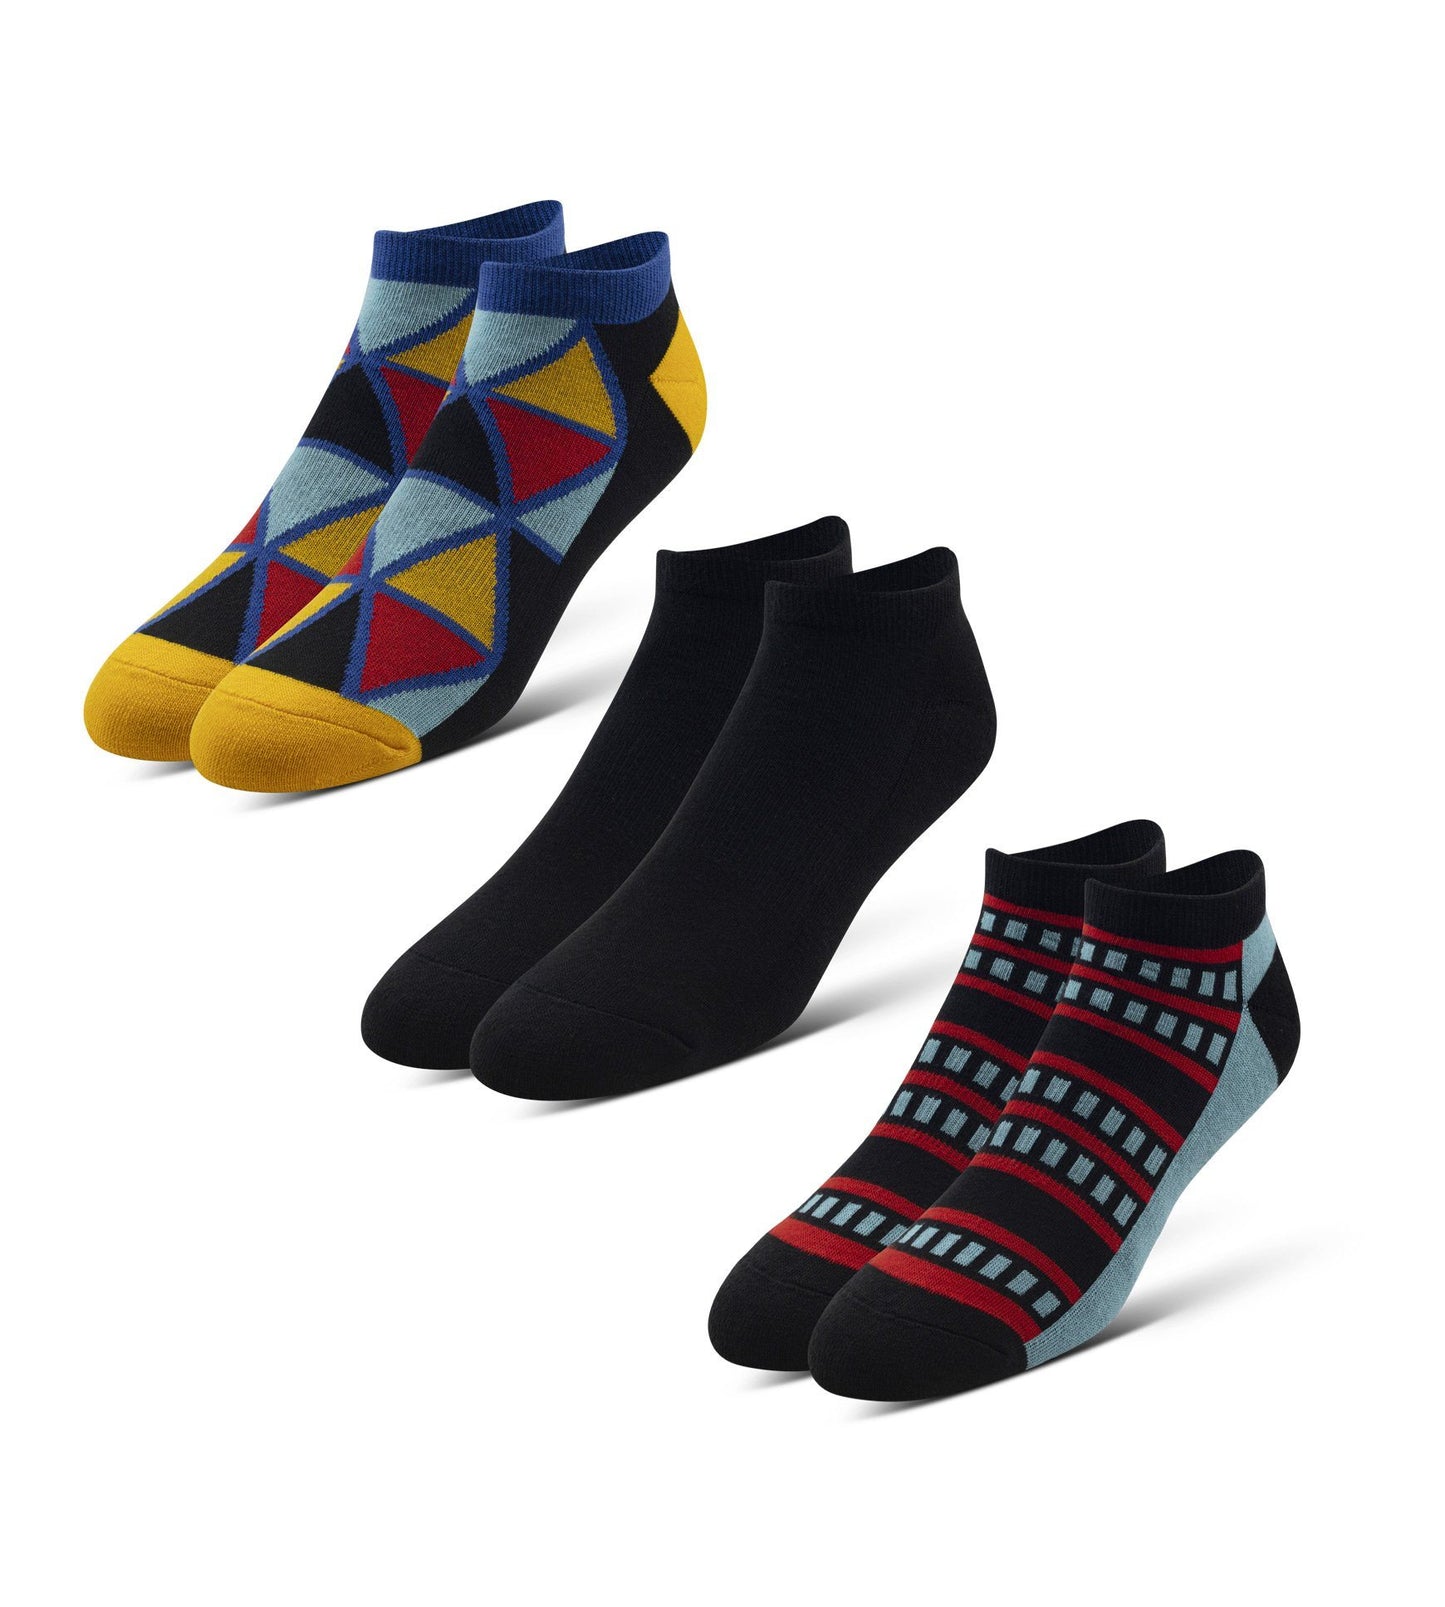 Cushion Low-Cut Socks 3 Pack in black, blue, red, and yellow